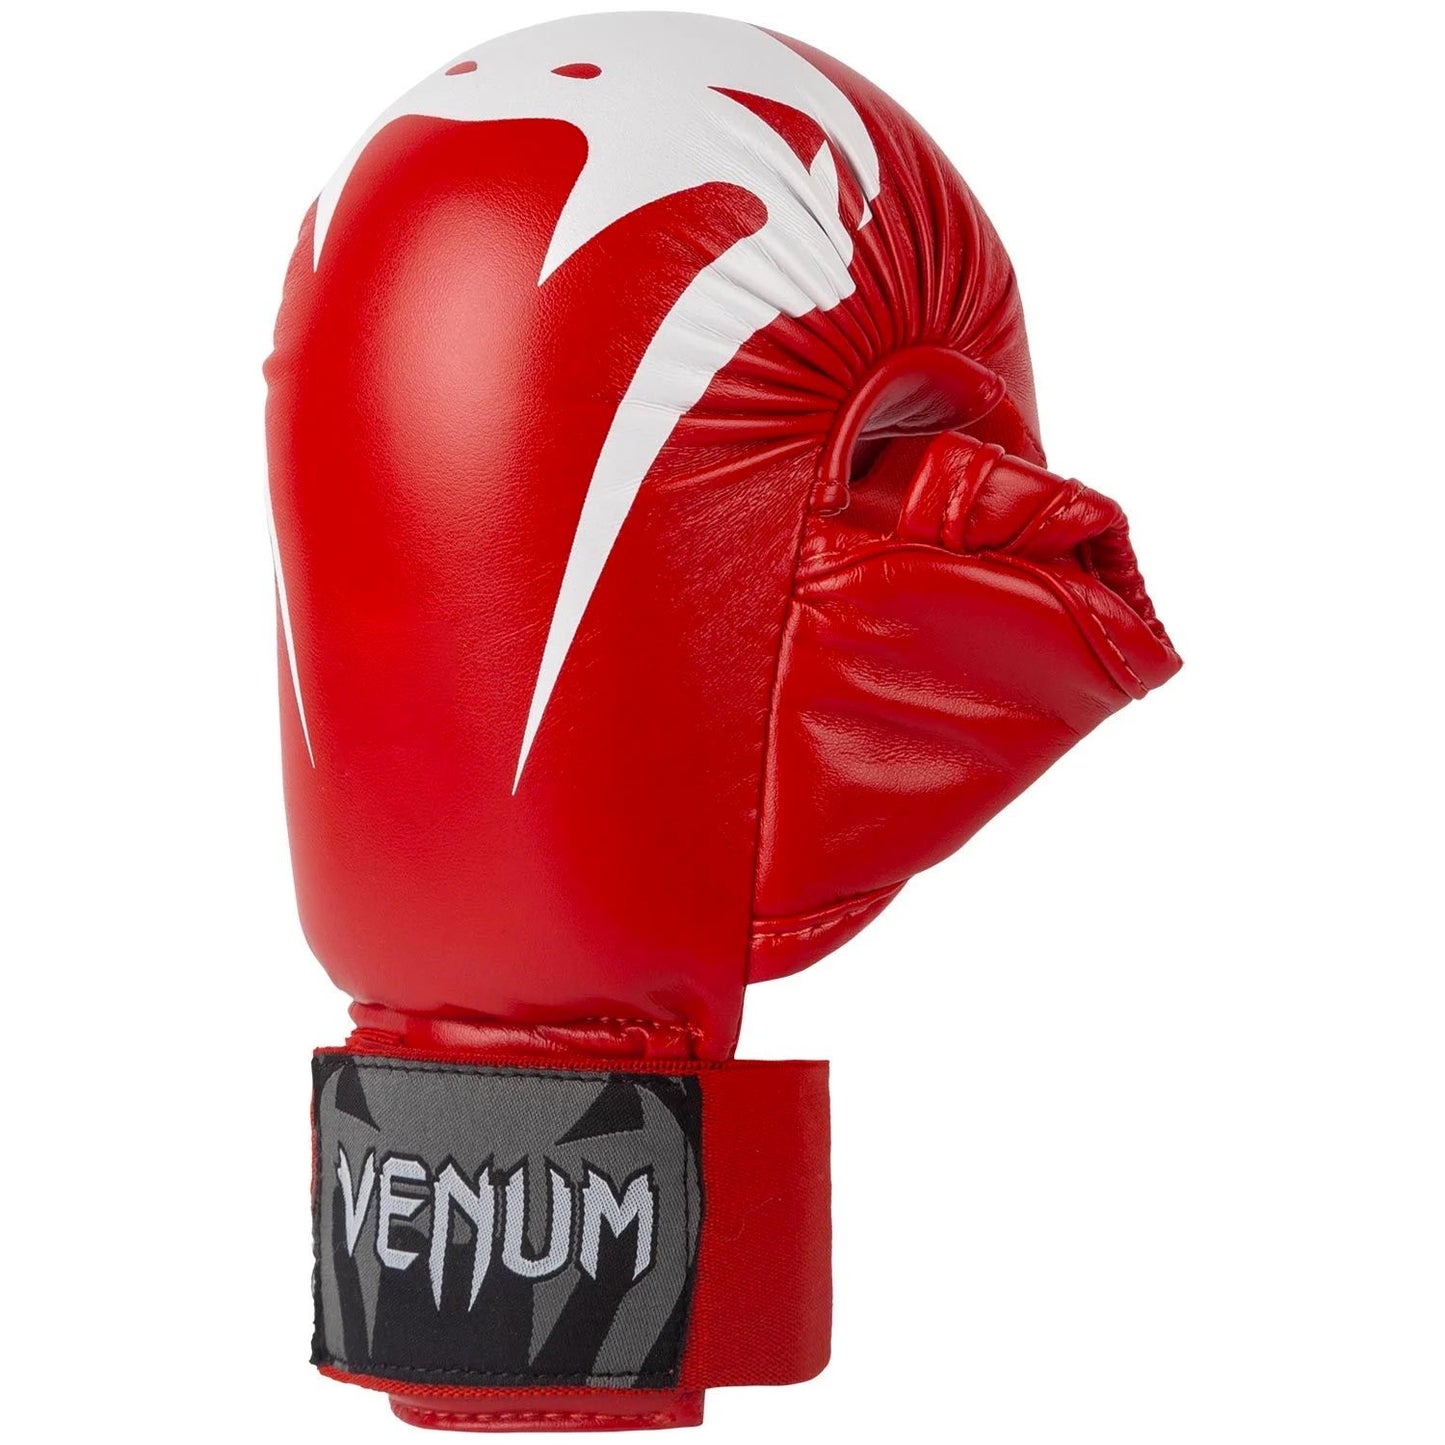 Venum Giant Karate Mitts - With Thumbs - Red